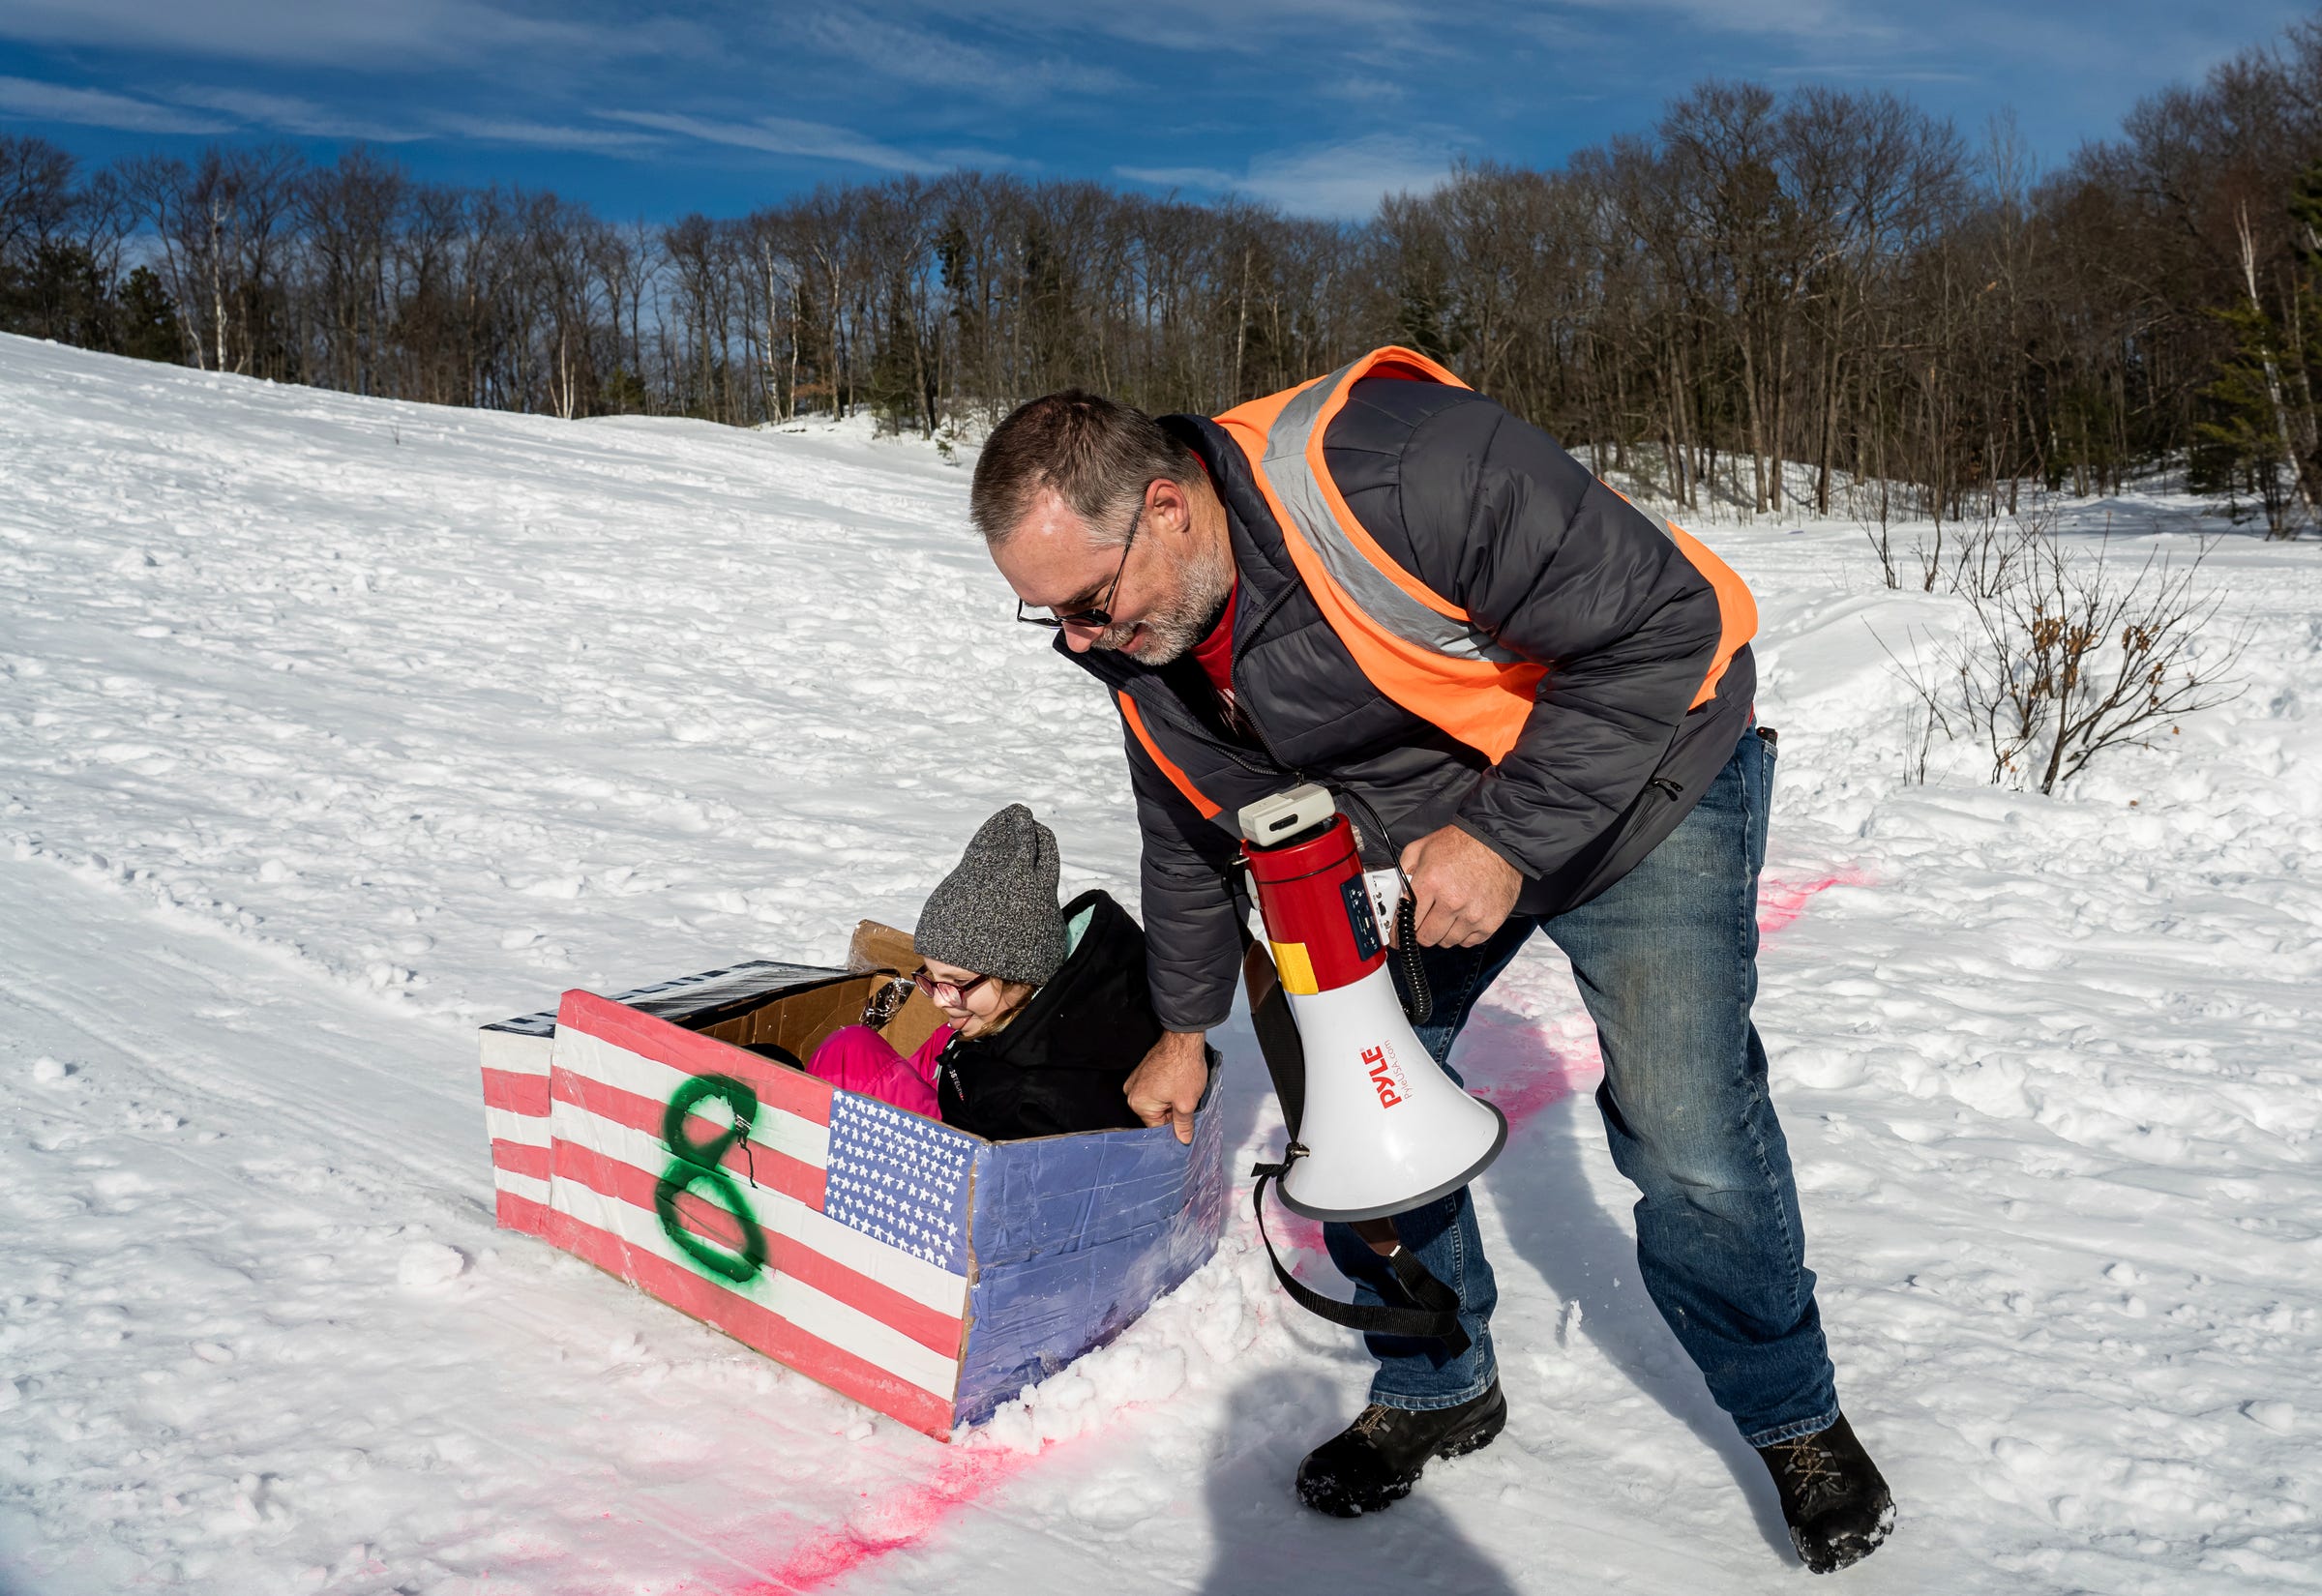 Ryan Lipinski helps pull Aryanna Campbell, of Gwinn, across the finish line after her sled got stuck midway down the hill during the K.I. Sawyer Cardboard Sled Races on Feb. 11, 2023.